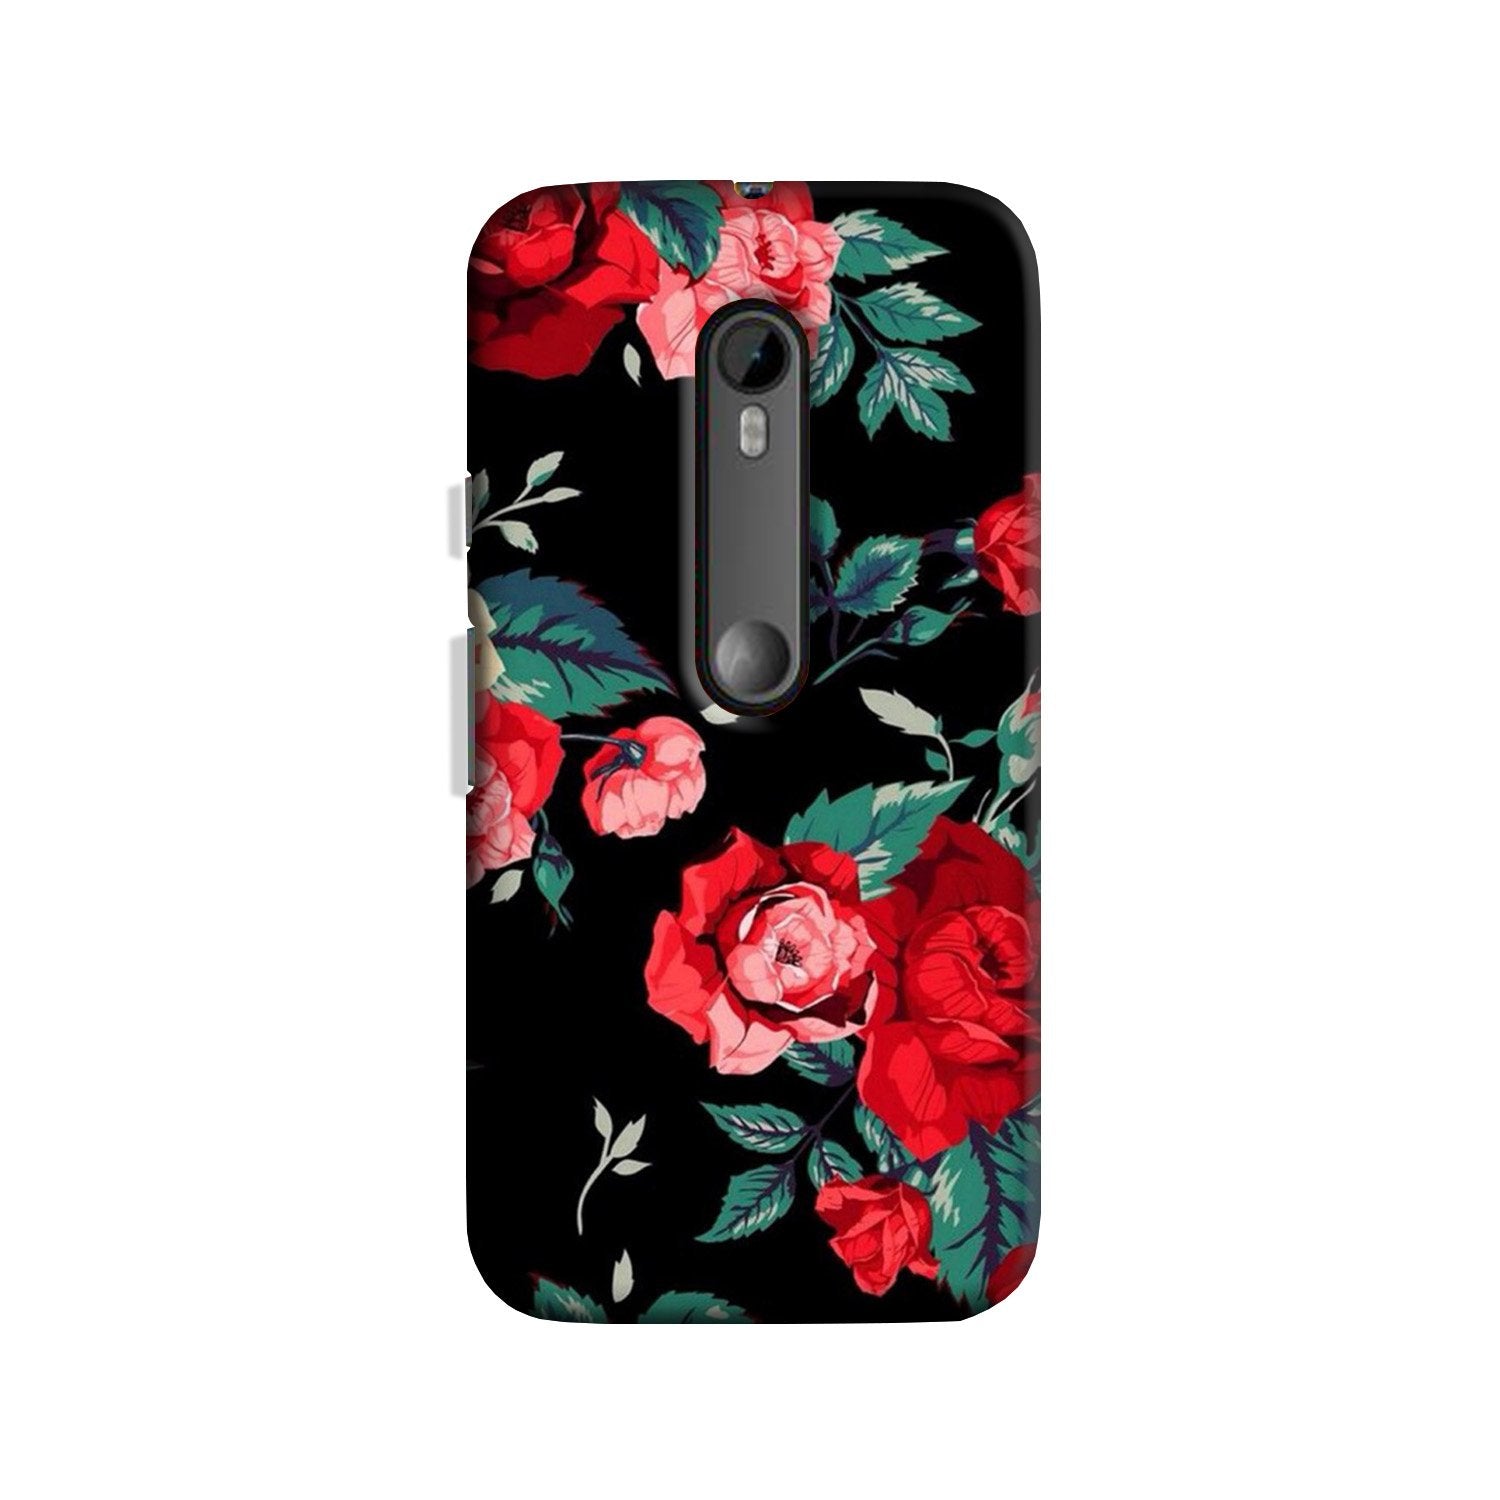 Red Rose2 Case for Moto X Play